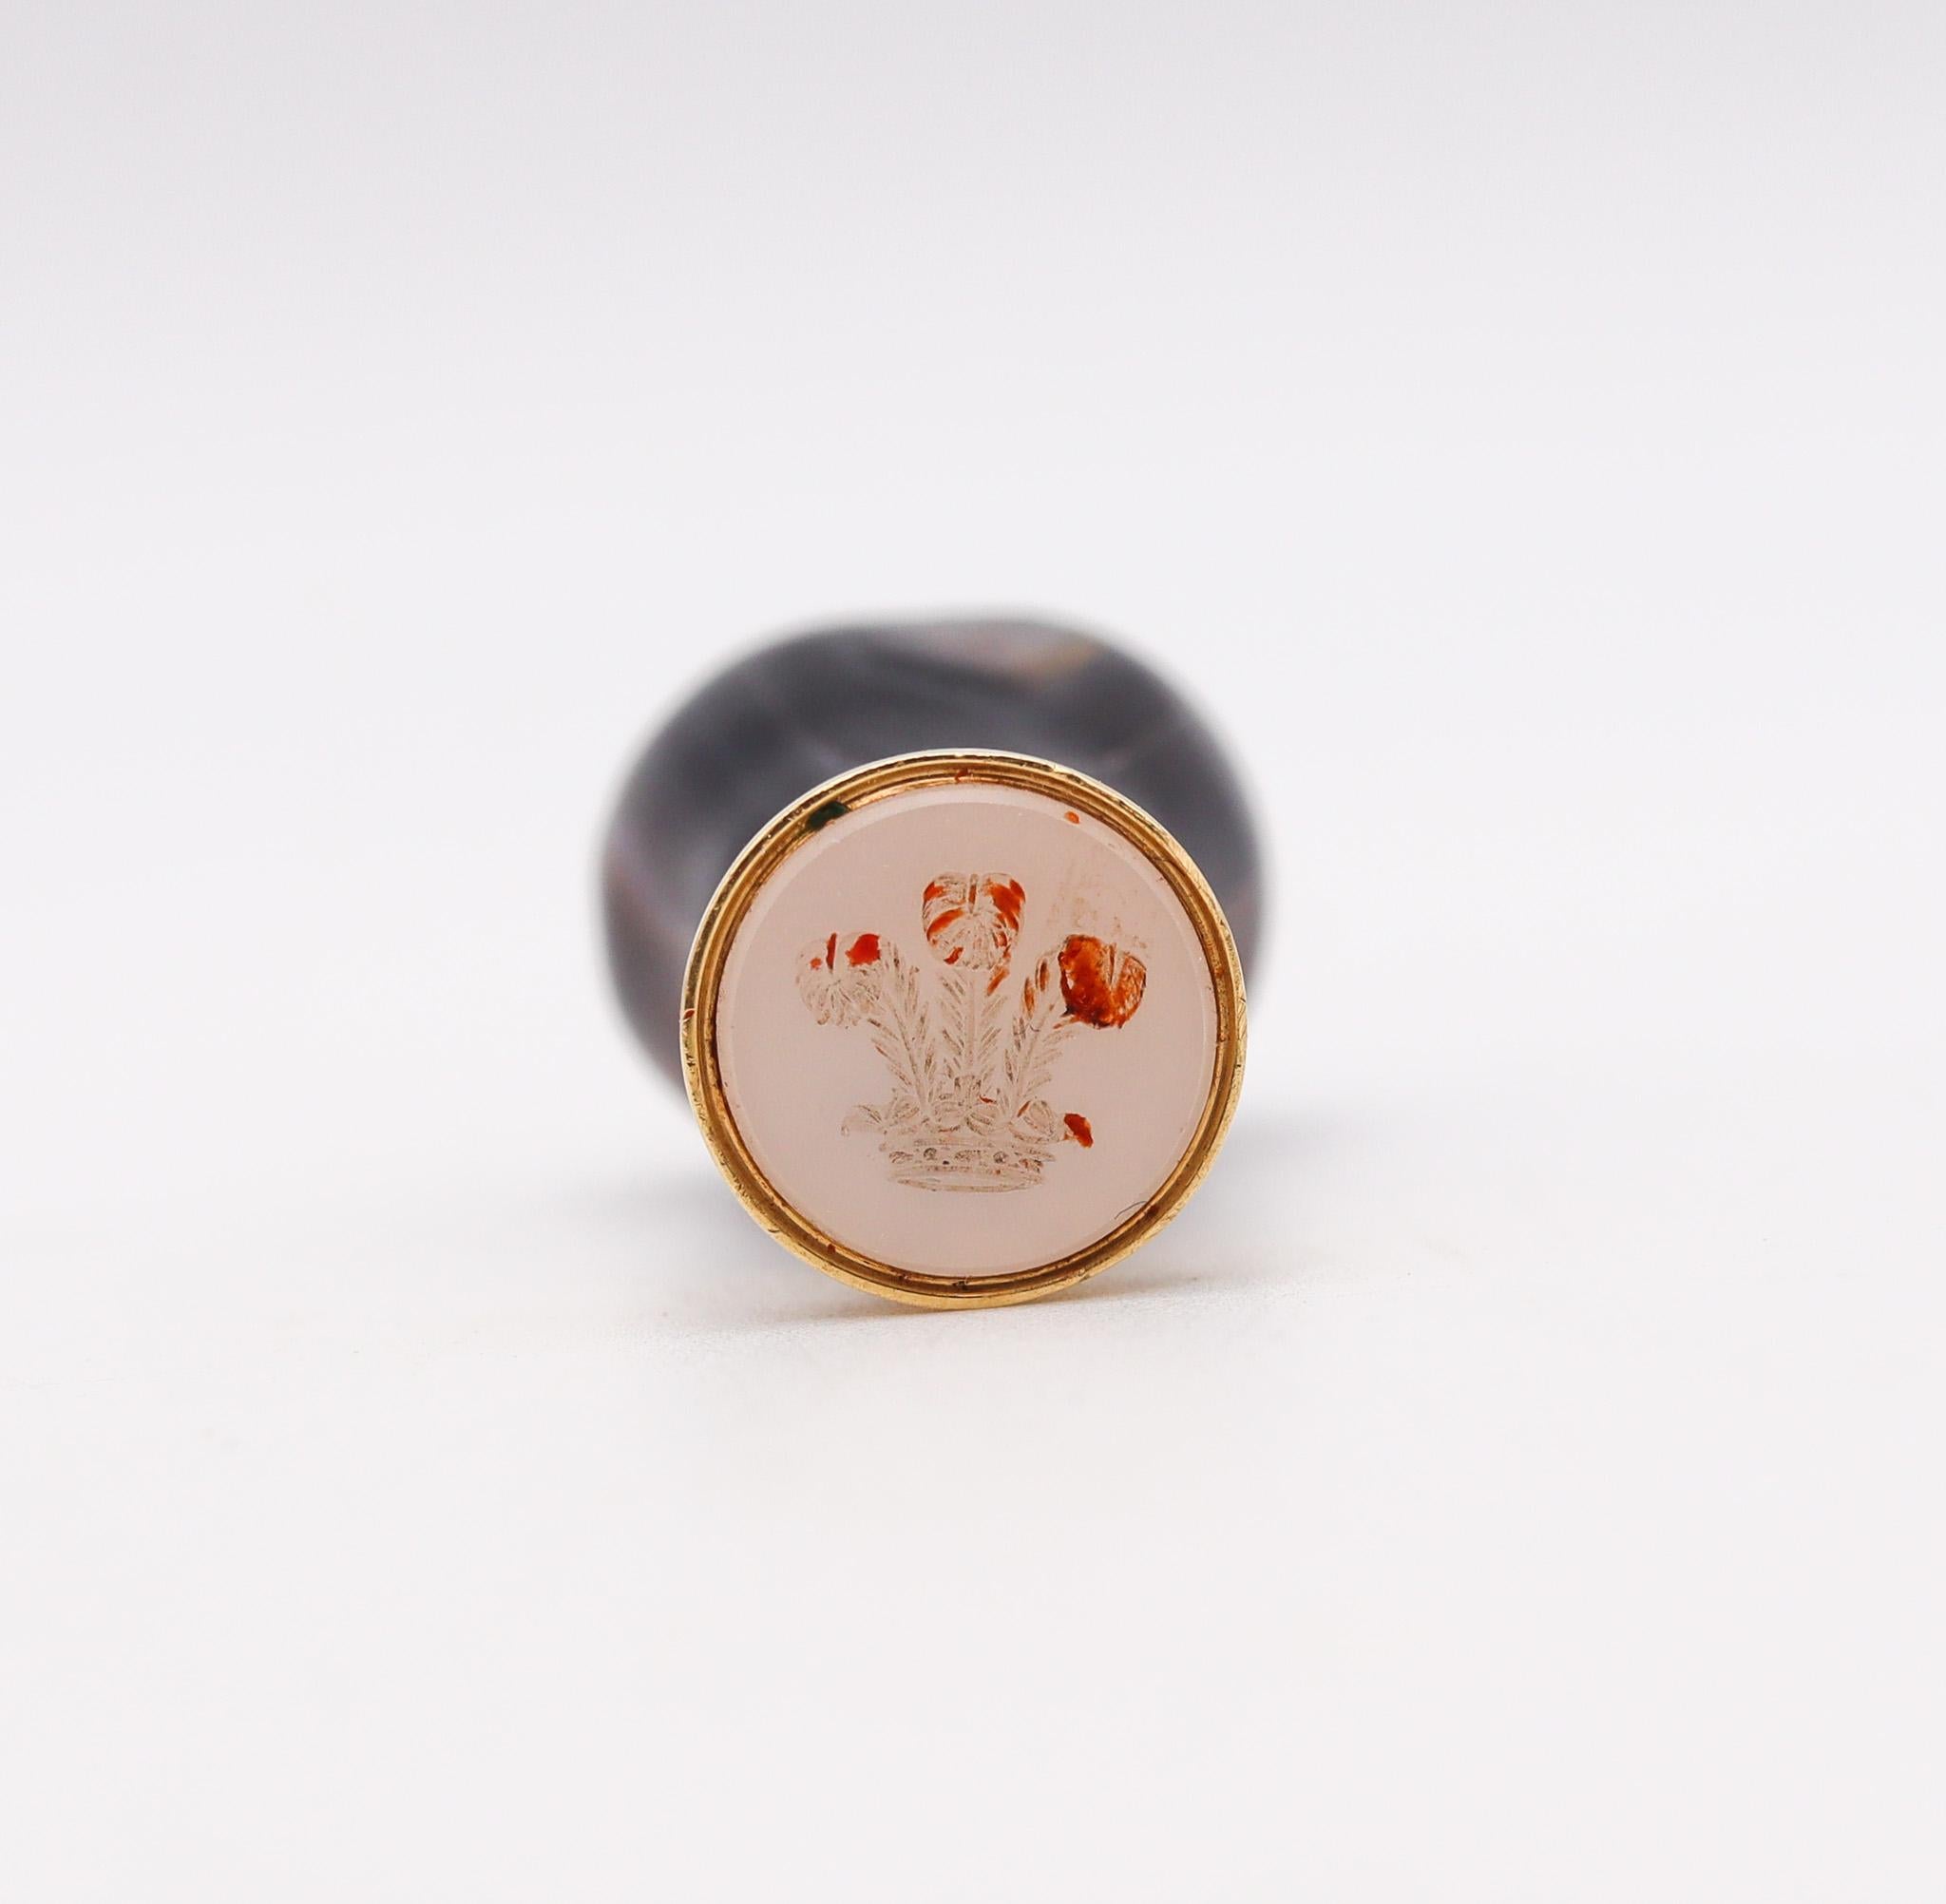 Women's or Men's Edwardian 1900 Agate Desk Seal In 18Kt Gold With The Arms of The Prince of Wales For Sale